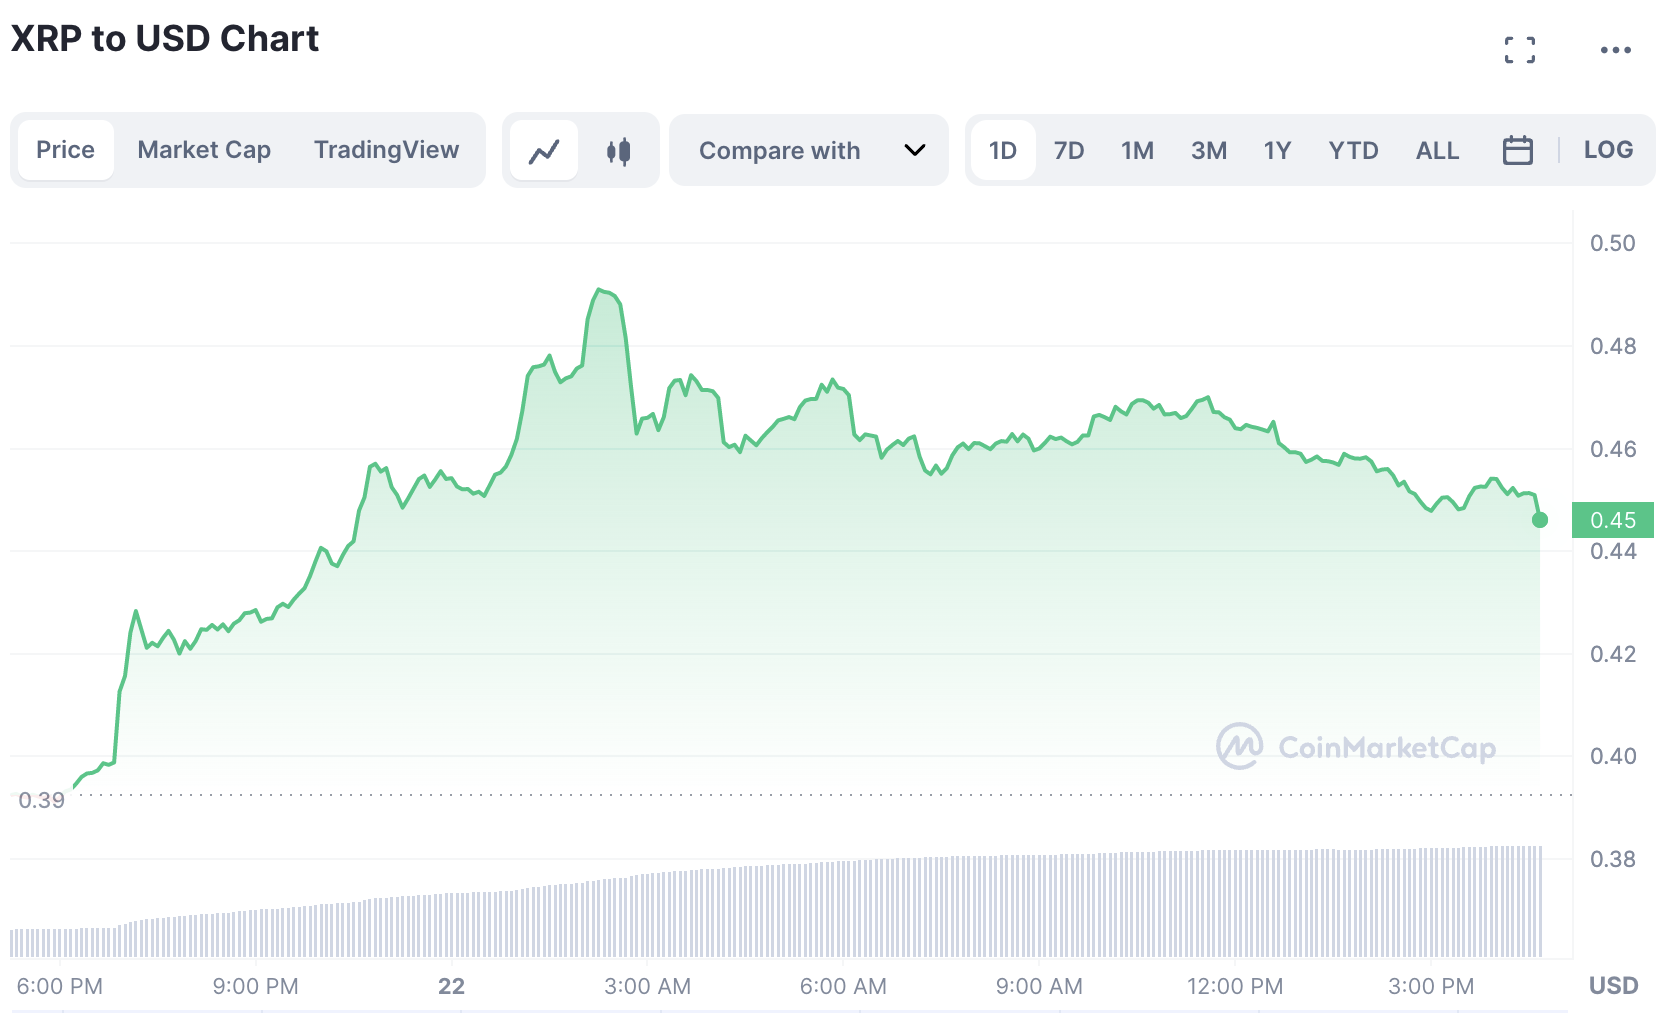 XRP Price March 22